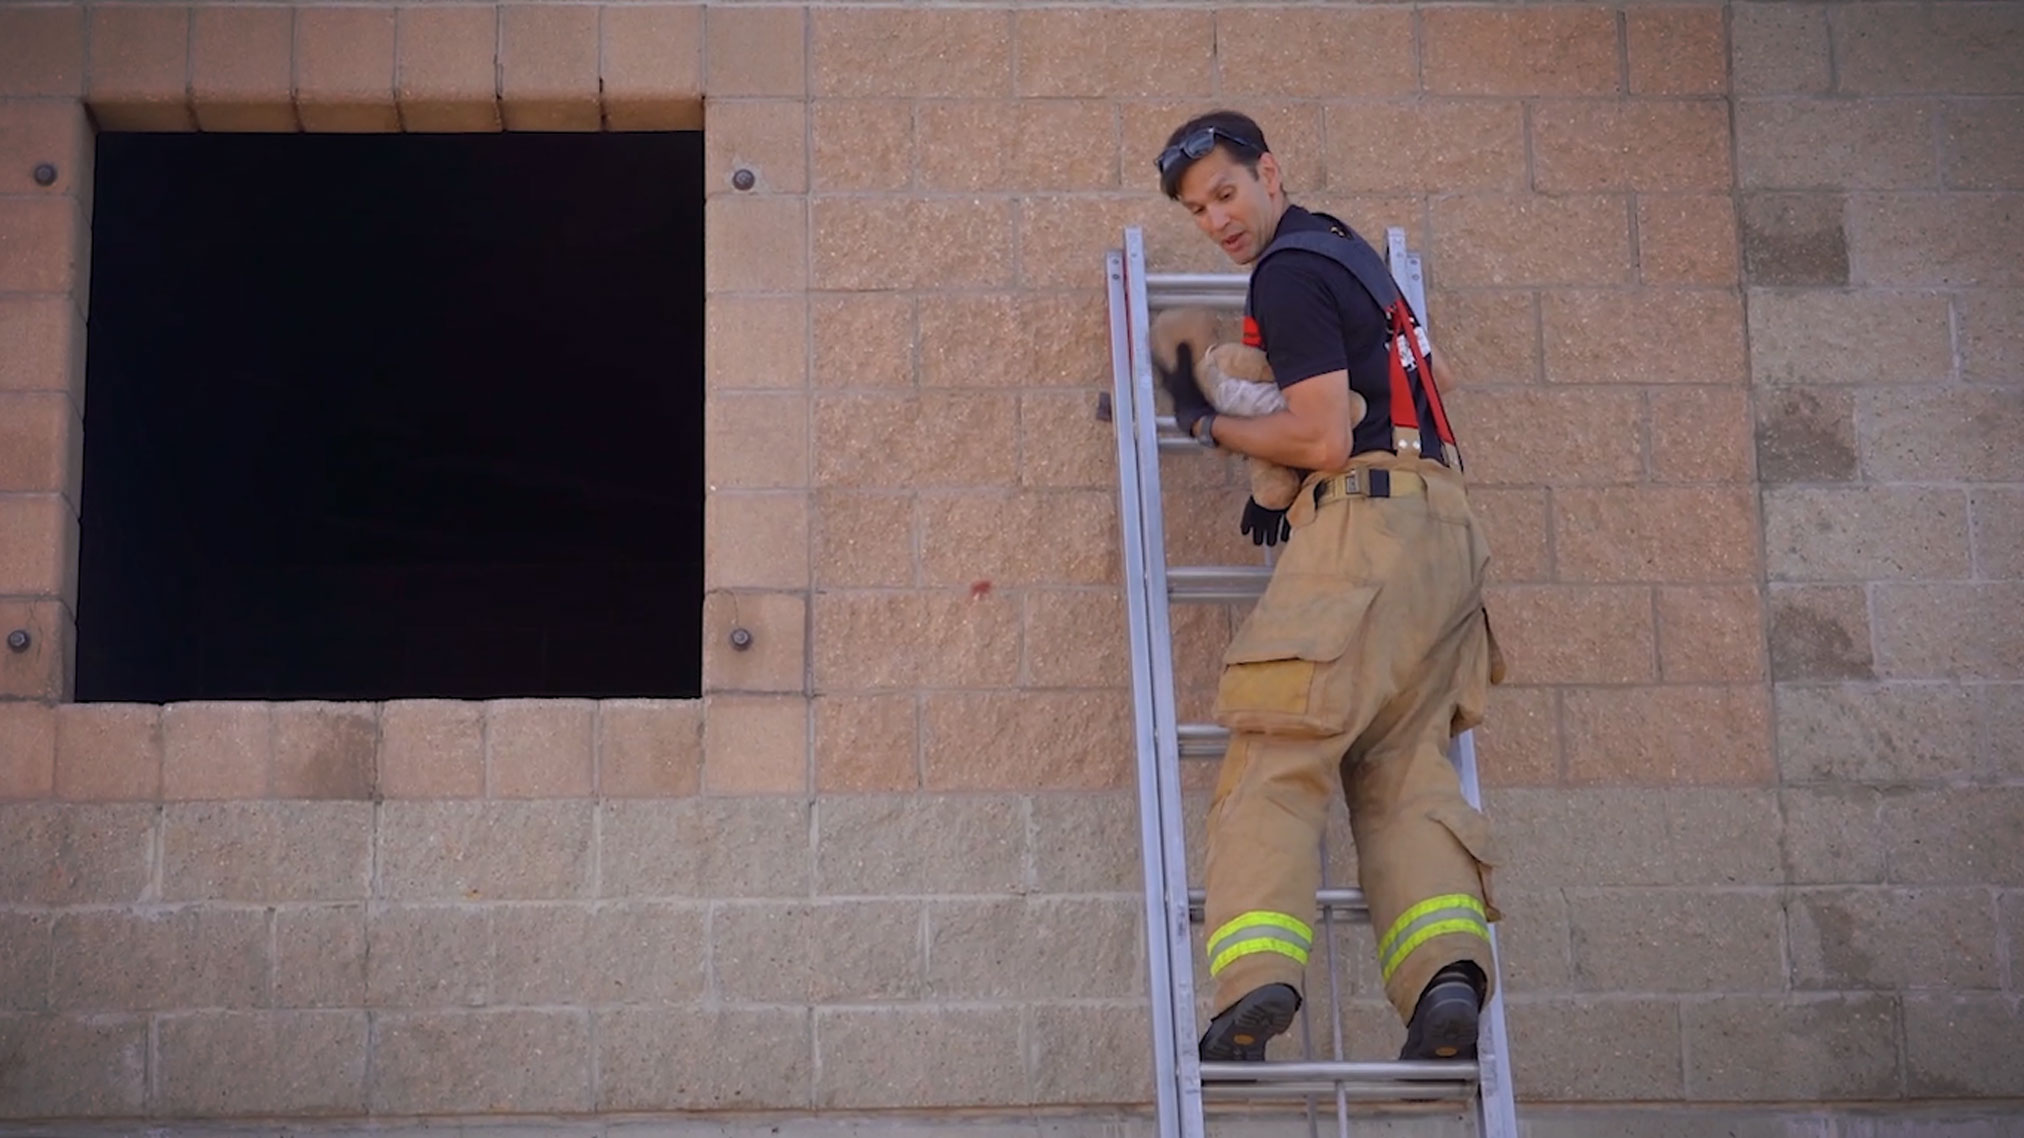 Featured image for “Passing Safely on a Firefighter Ground Ladder”